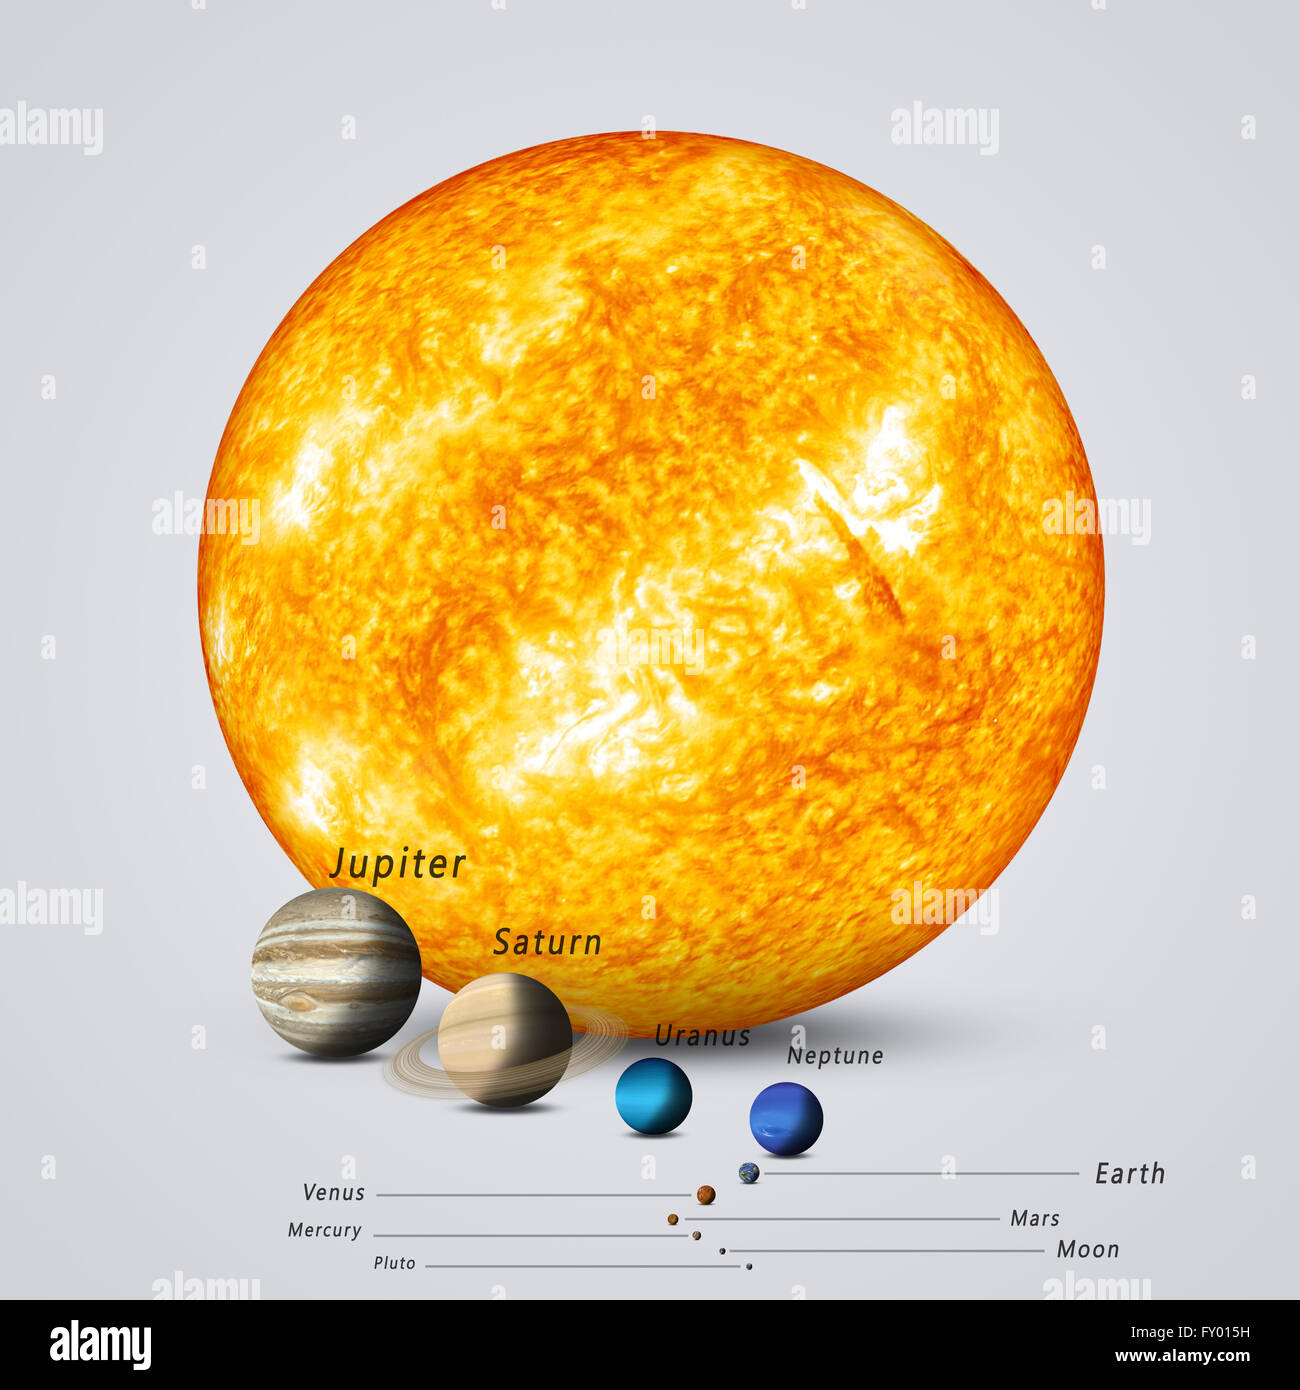 sun compared to largest star